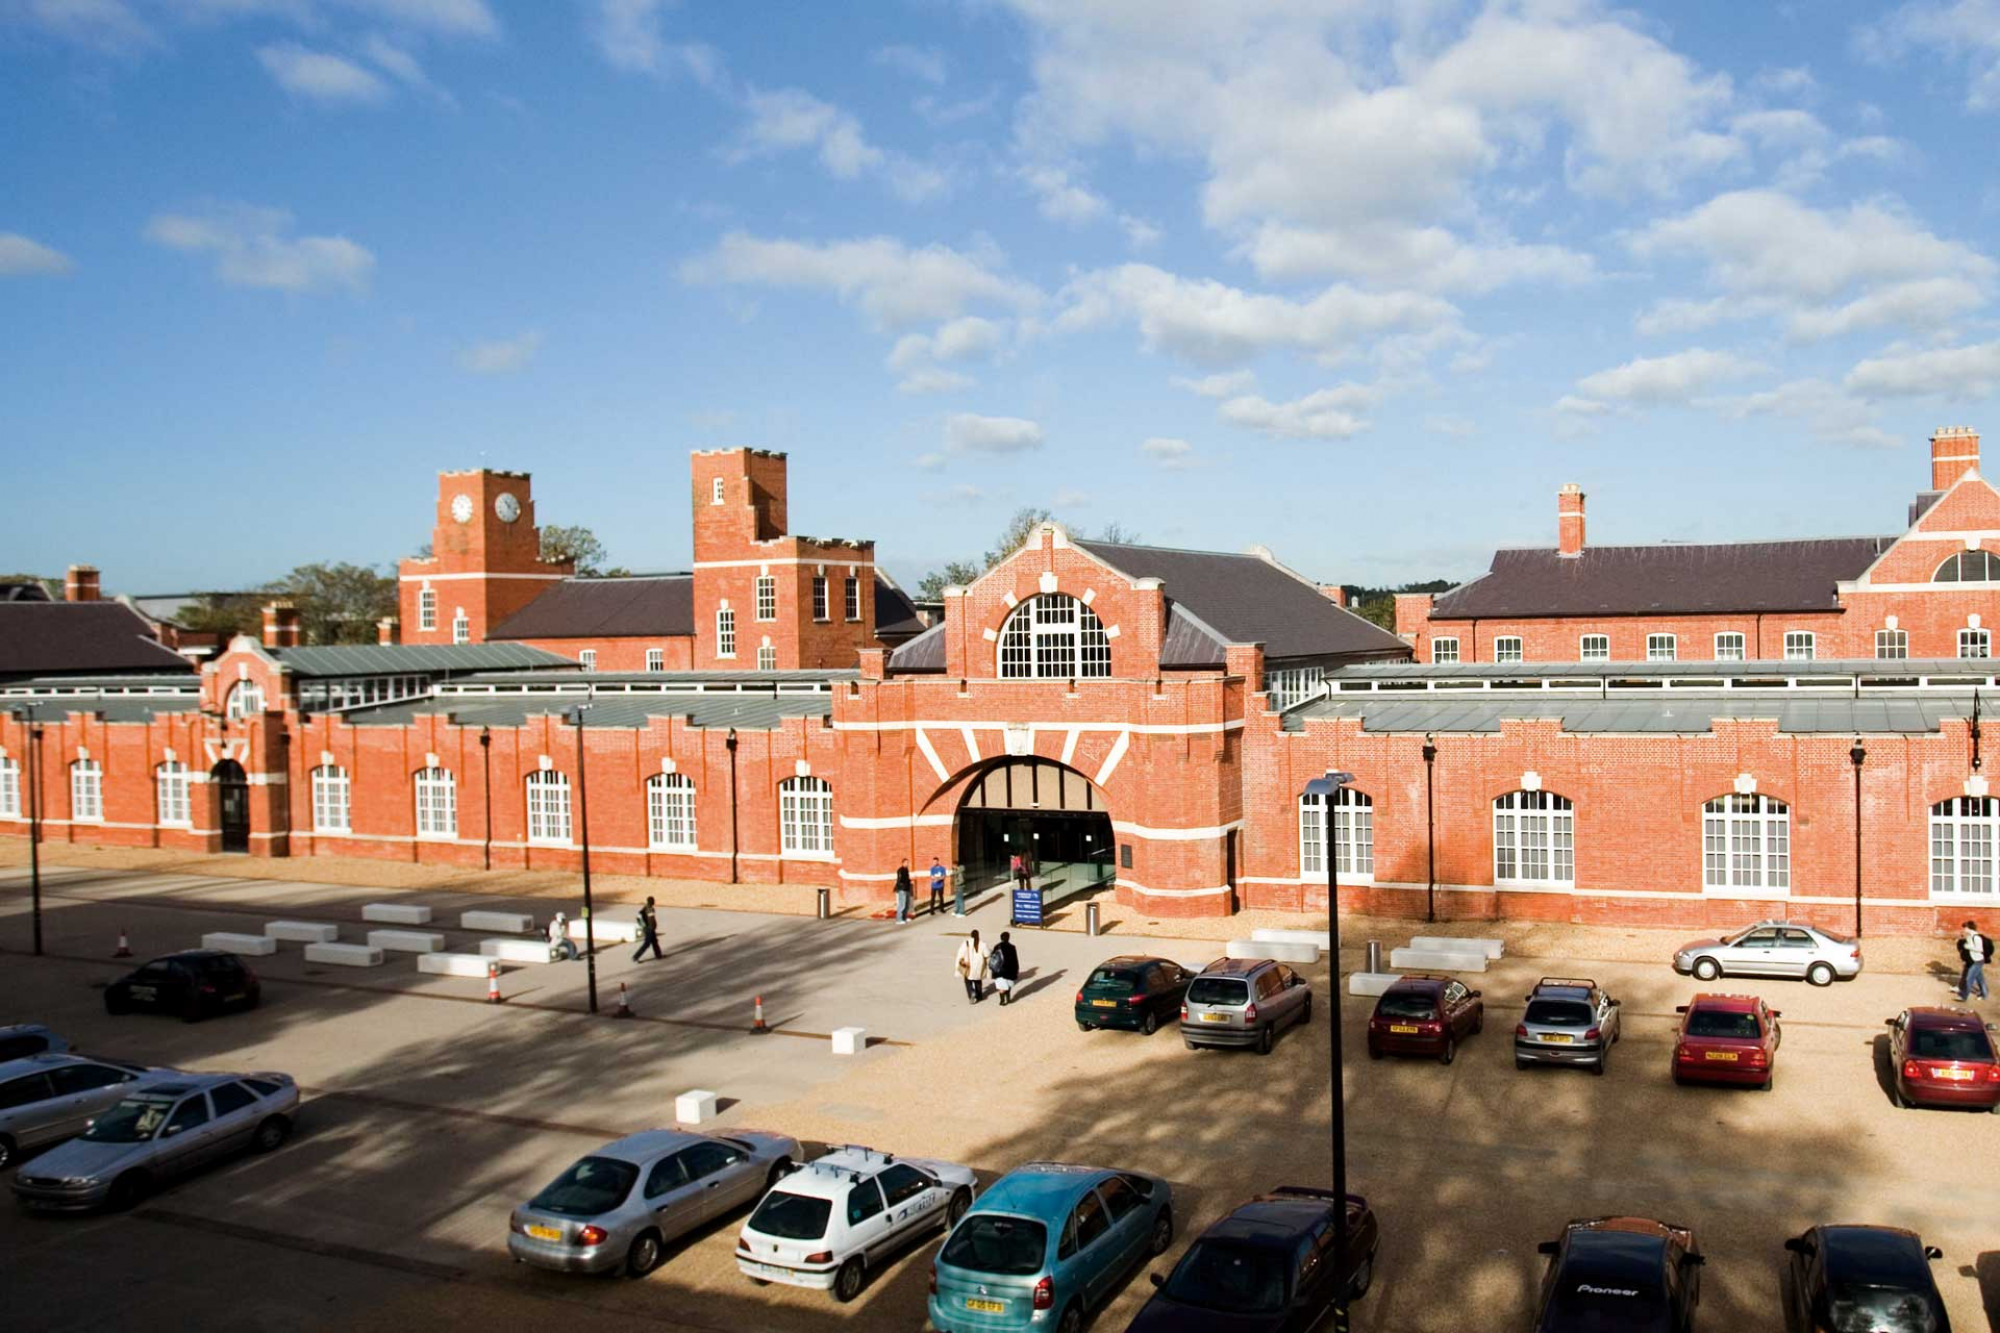 Drill Hall Library on Kent's Medway campus.